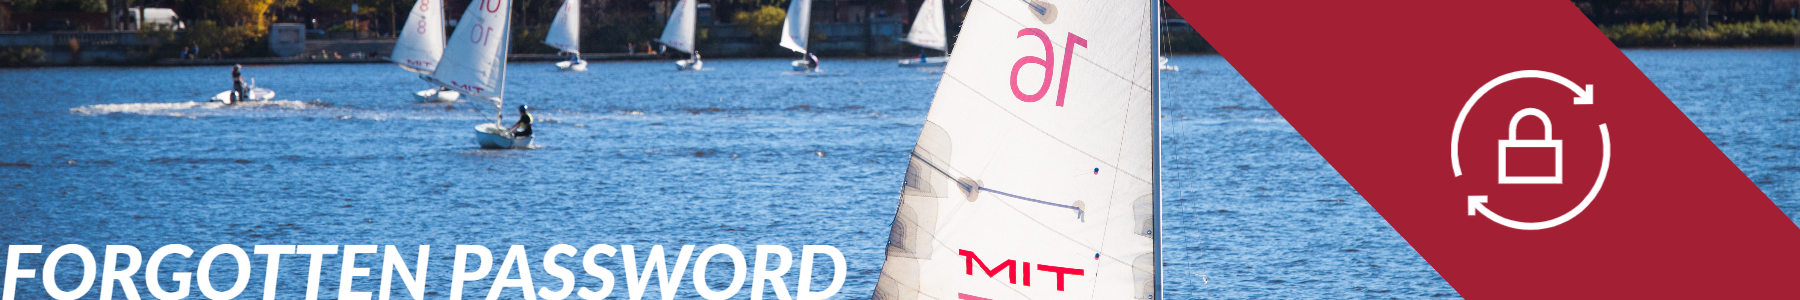 Image of the Charles River with MIT sailboats in the water with "Forgotten Password" written.